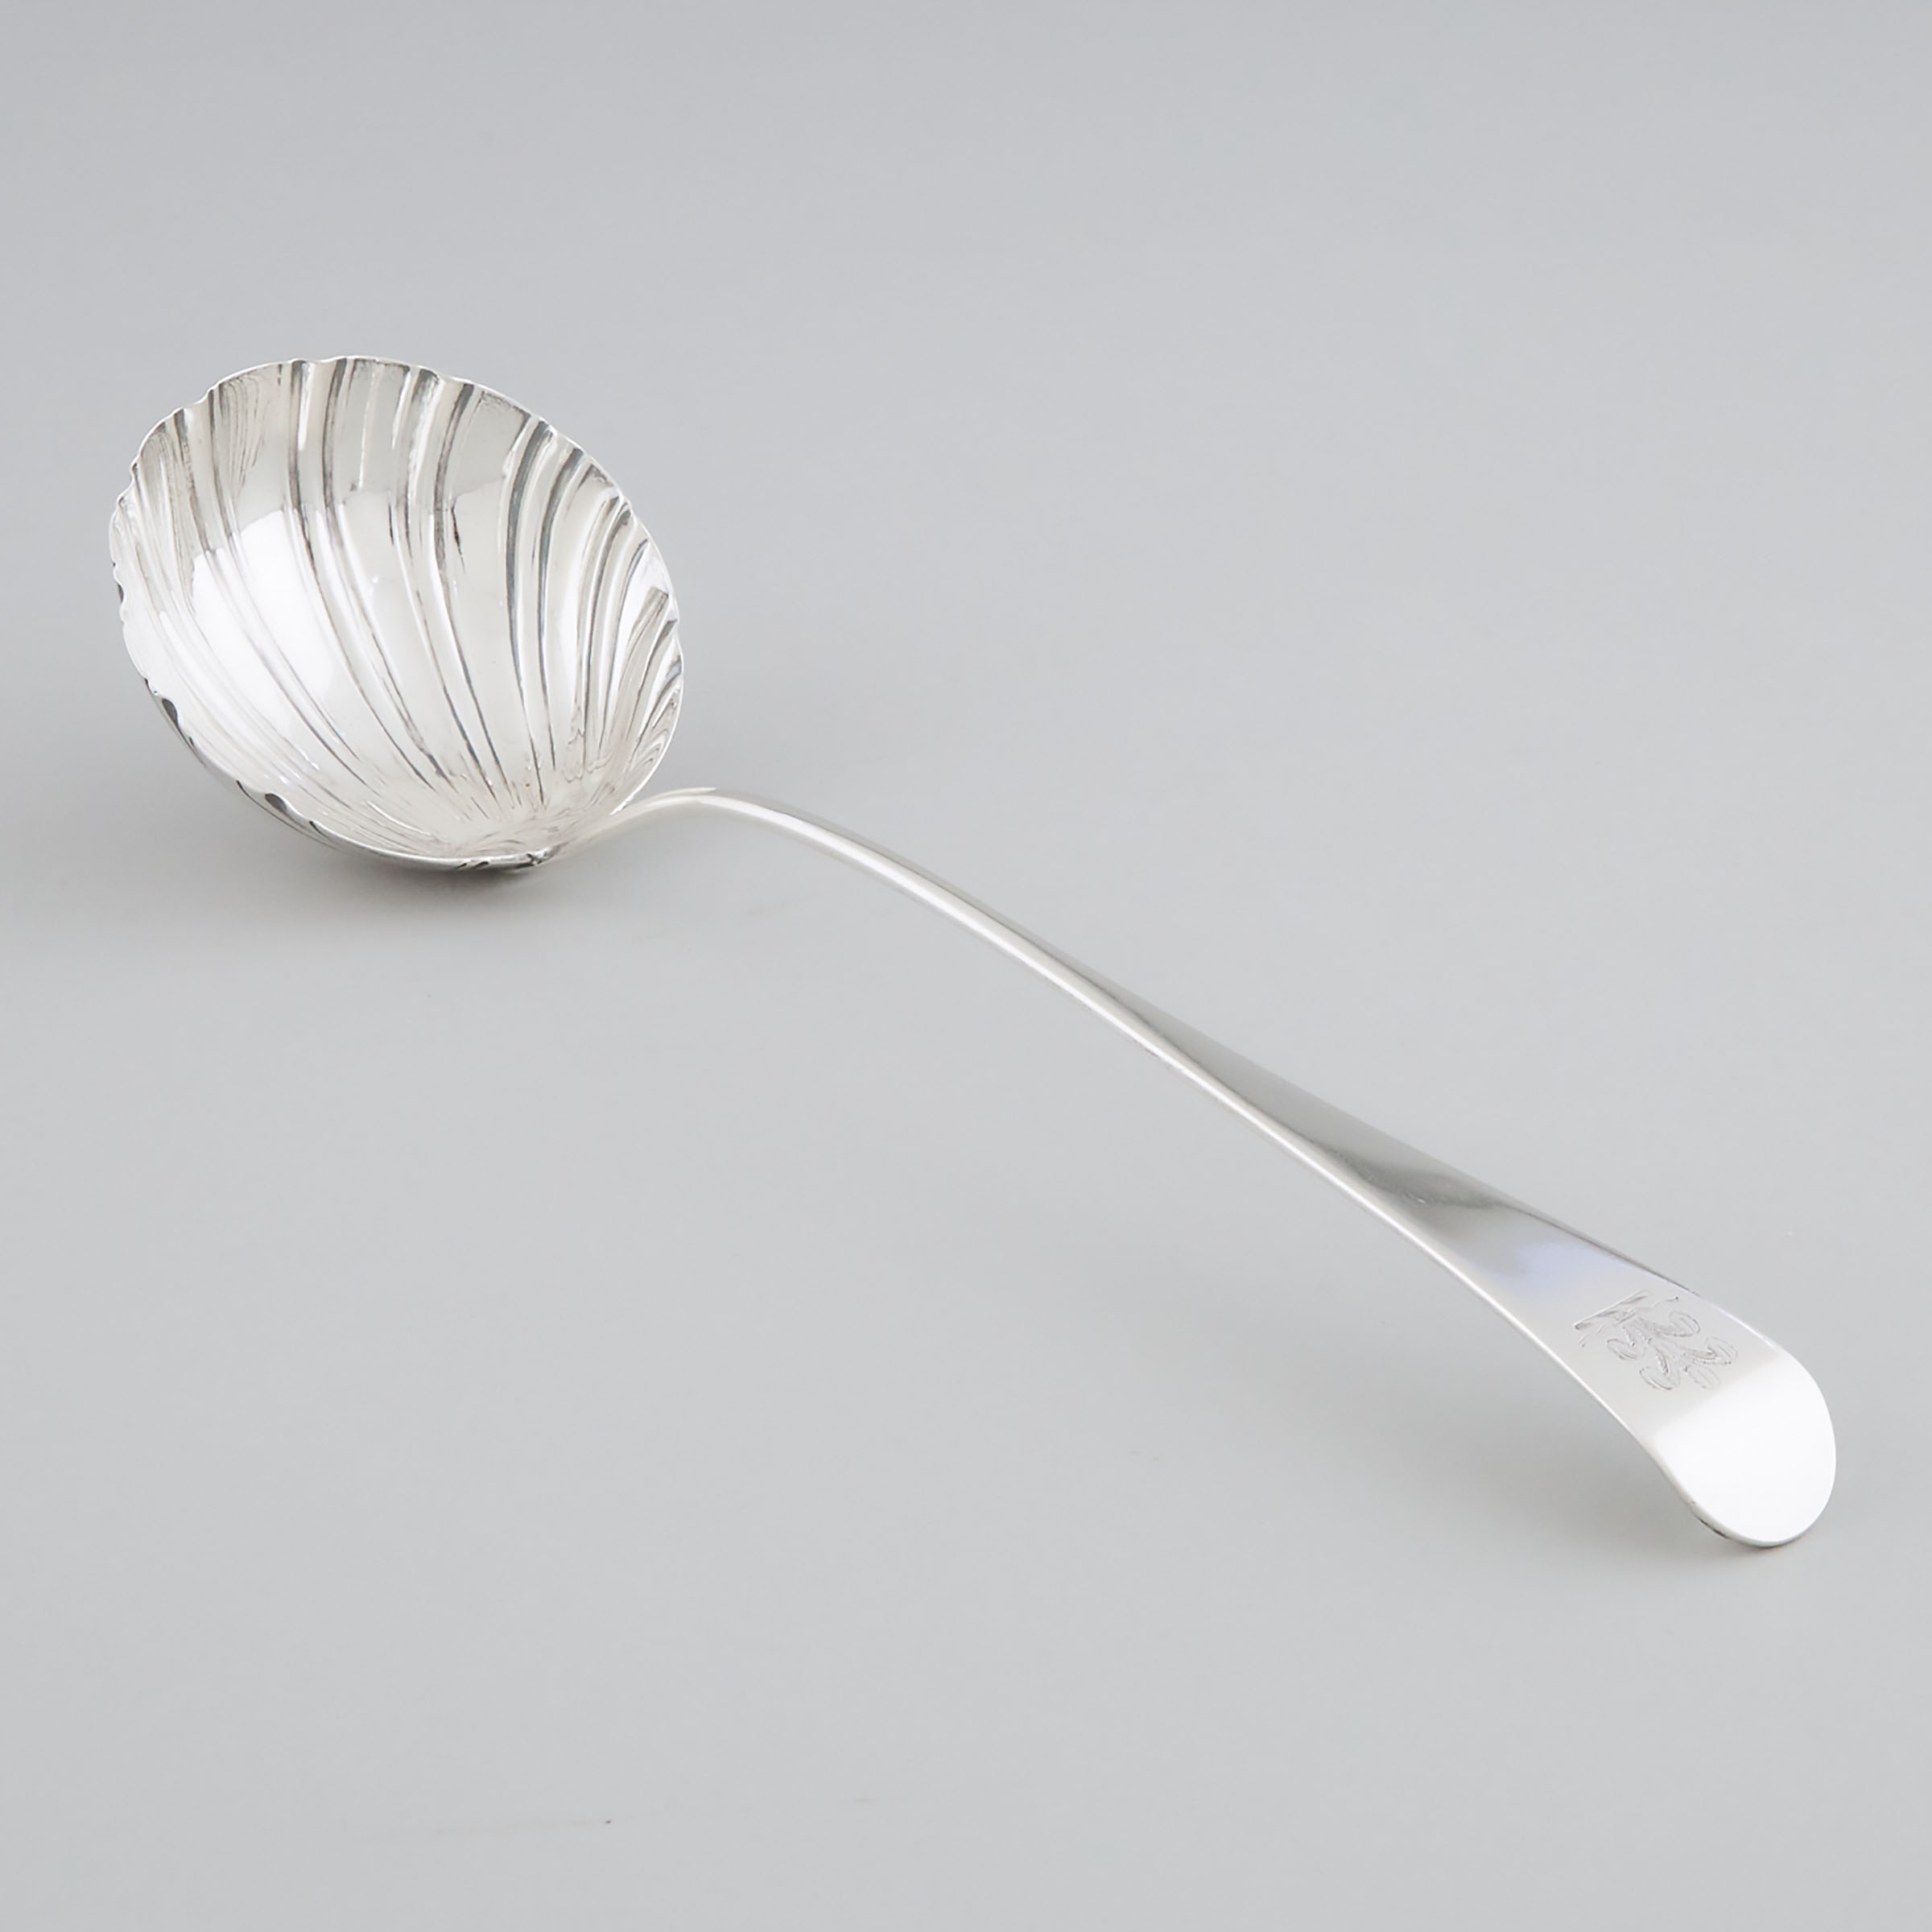 George III Silver Old English Pattern Soup Ladle, probably William Withers, London, 1764